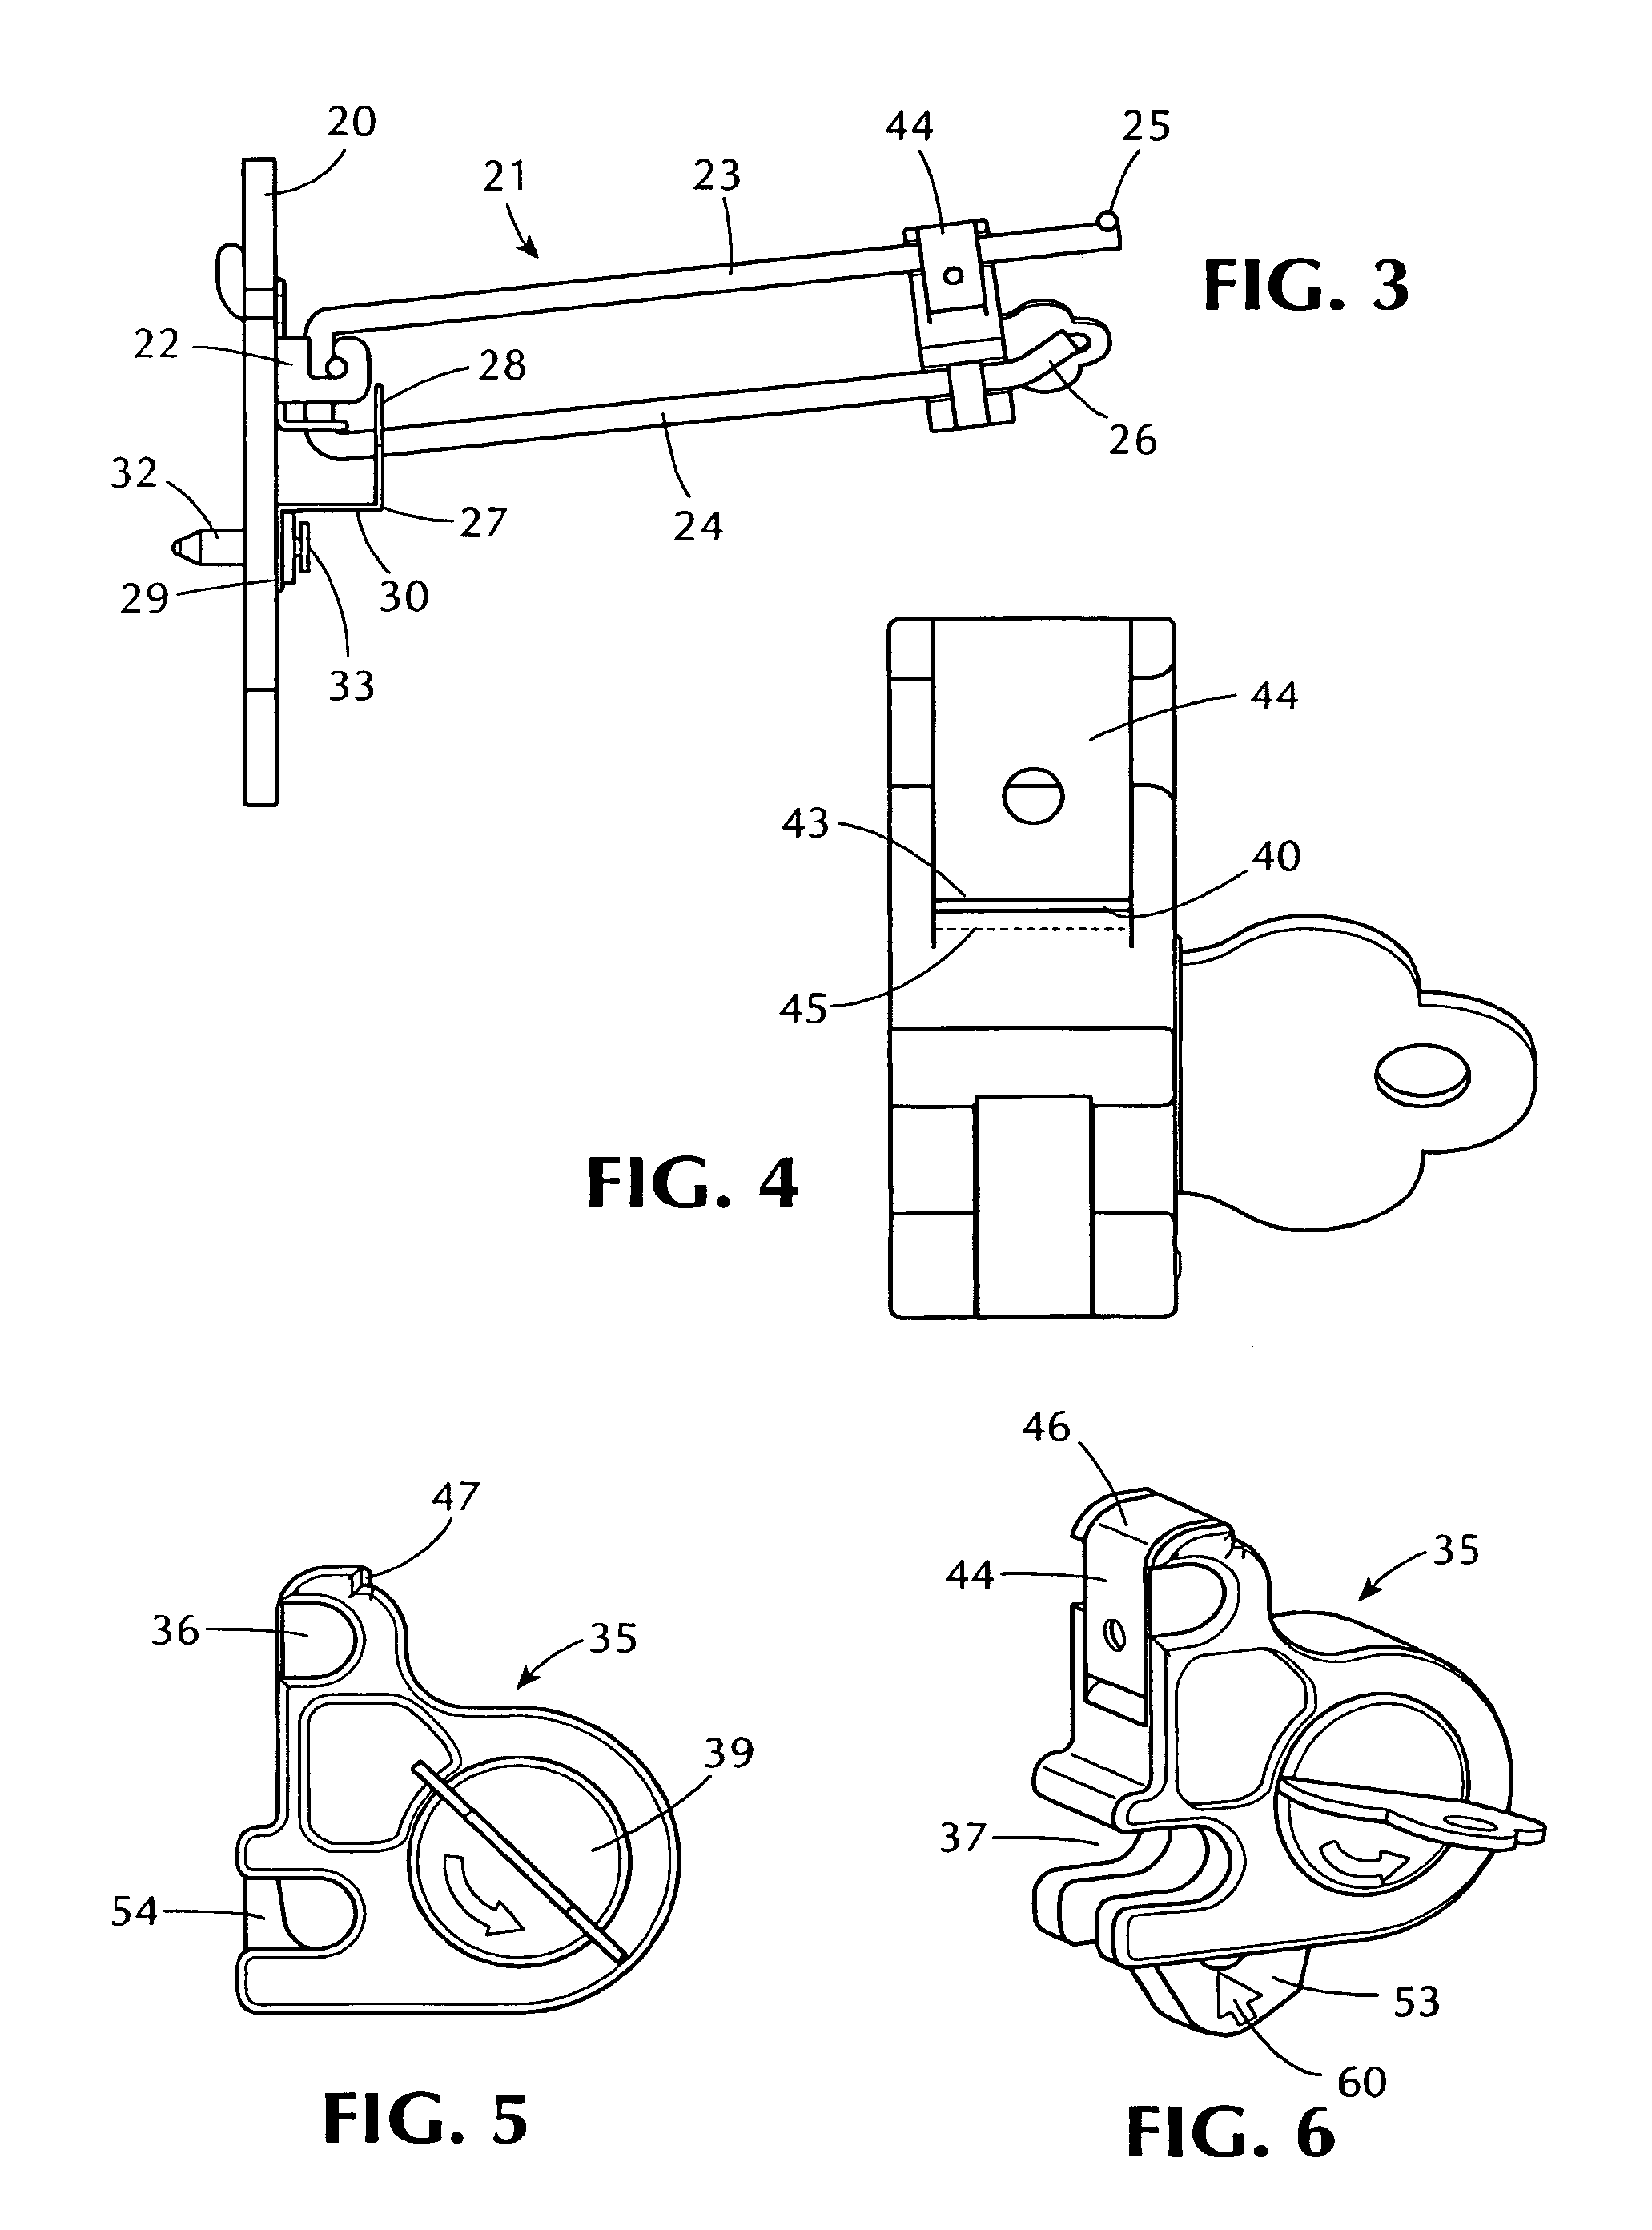 Locking attachment for product display hooks